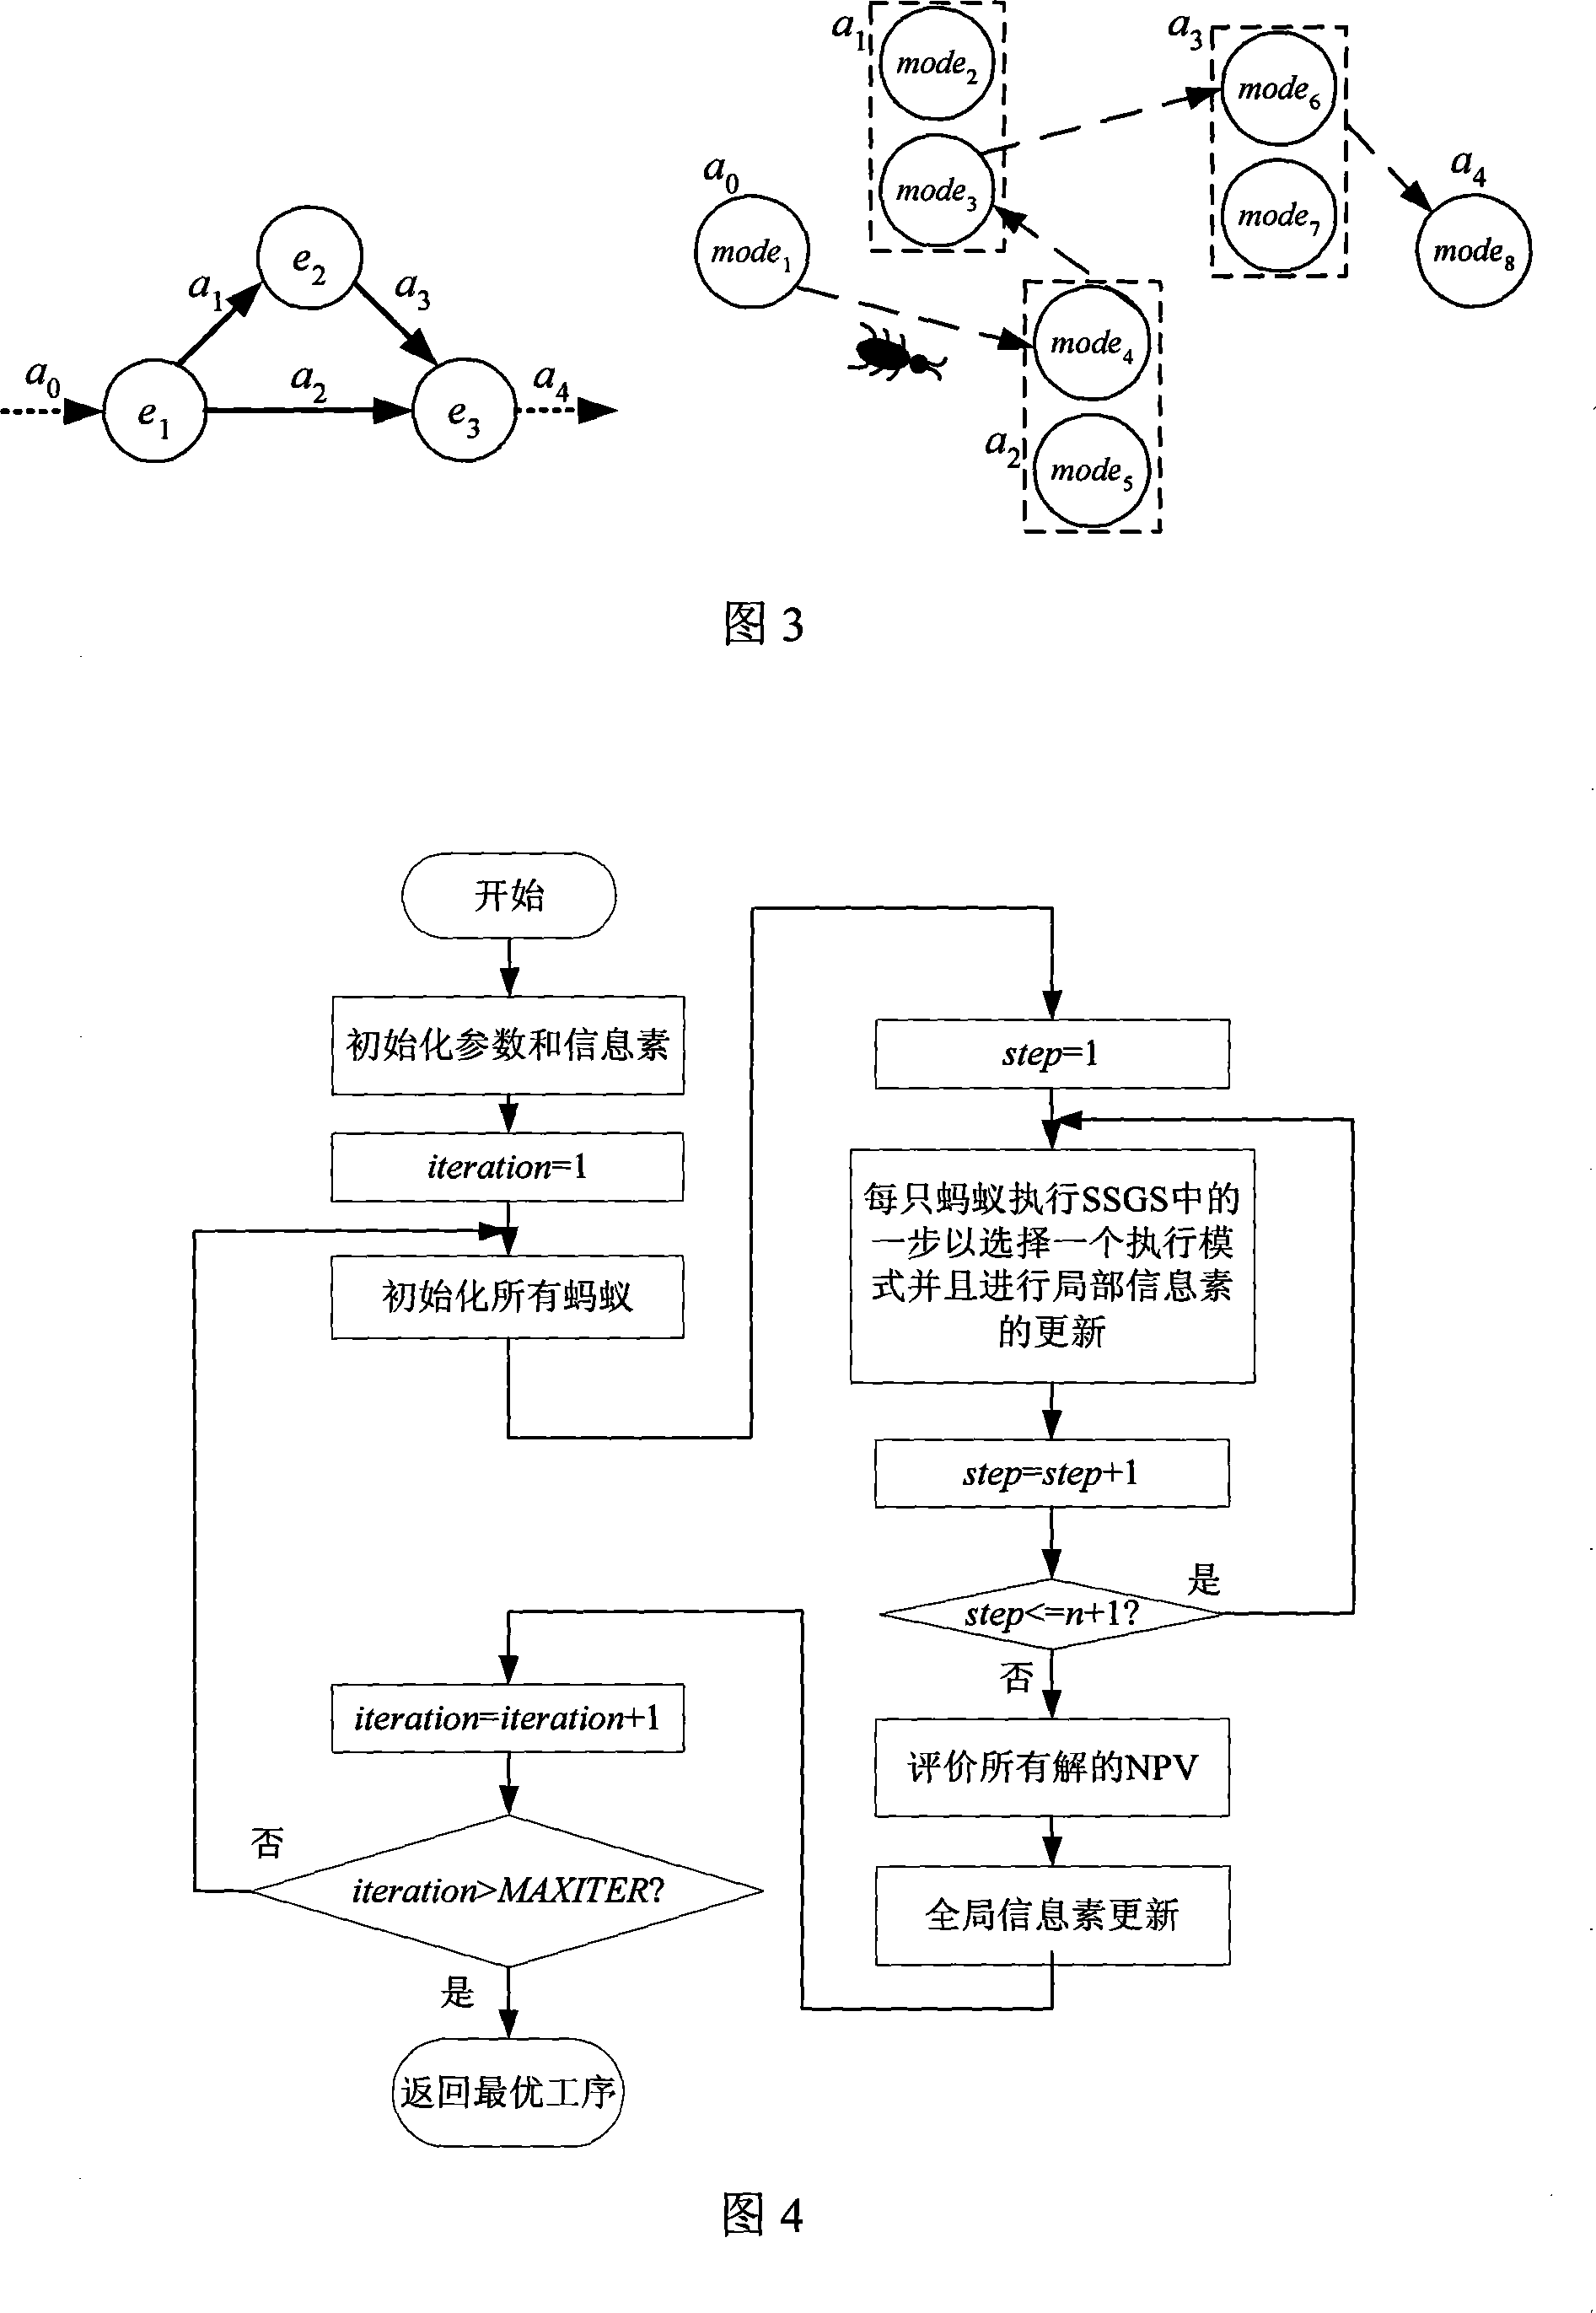 Method for optimizing items scheduling discount cash flow by ant colony algorithm